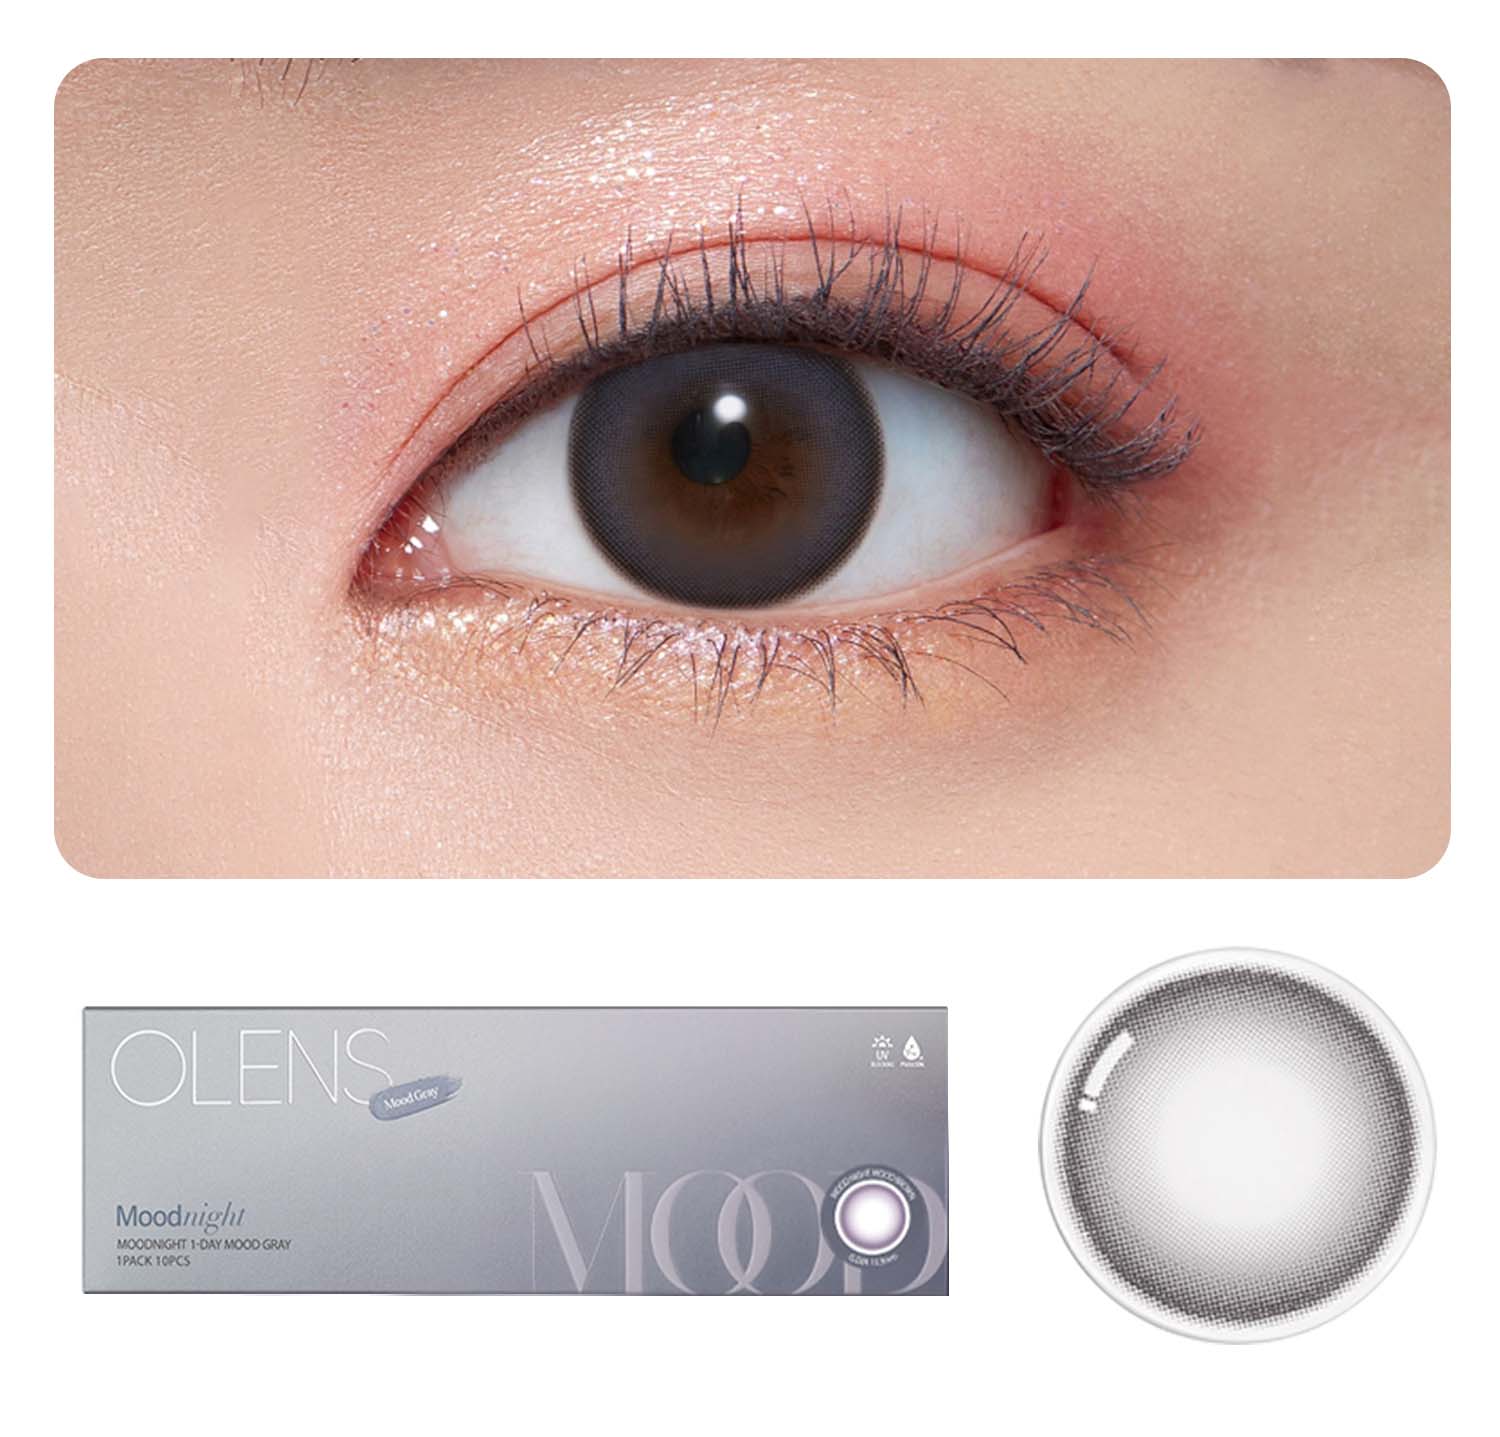 OLENS Premium Color Contact Lens | Mood Night Gray Color Contact Lens | Most Comfortable & soft | o-lens.co.in